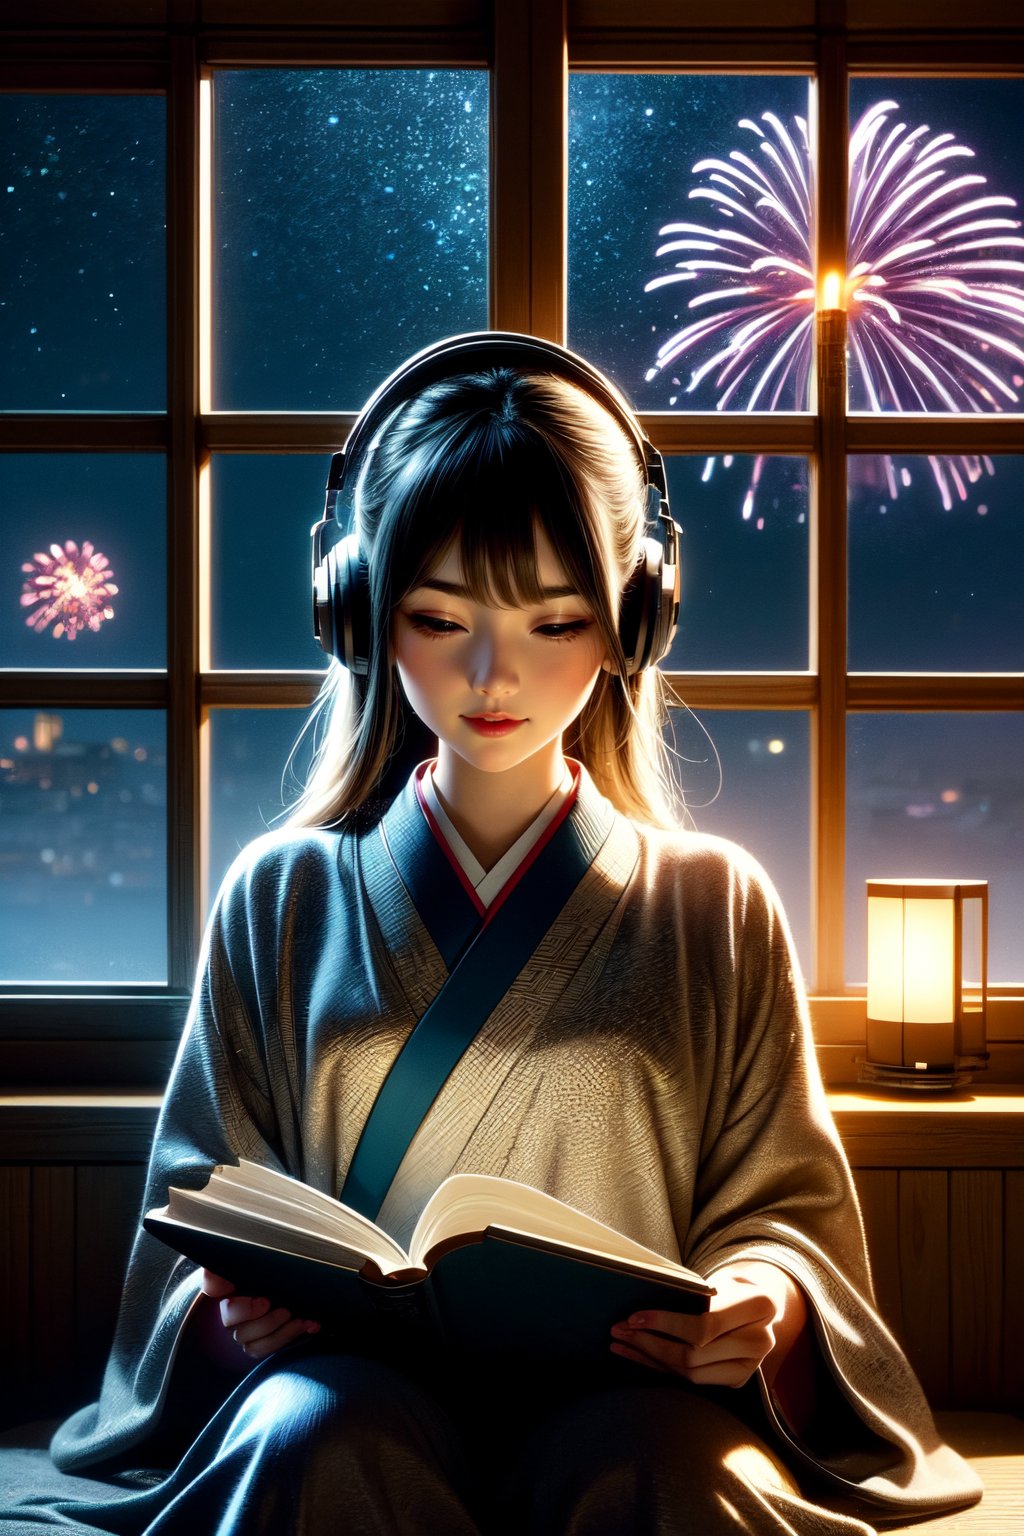 A cute LOFI music themed anime-style girl wearing a winter kimono, leisurely reading a book by a window. She is wearing headphones and listening to music. The window offers a view of a vast night sky filled with stars and fireworks, set in a cyberpunk world. The image features a warm color palette, creating a cozy and inviting atmosphere. This scene combines traditional Japanese elements with a futuristic cyberpunk setting, capturing the essence of a serene winter night. perfectly suited for a LOFI music background.,Lofi style